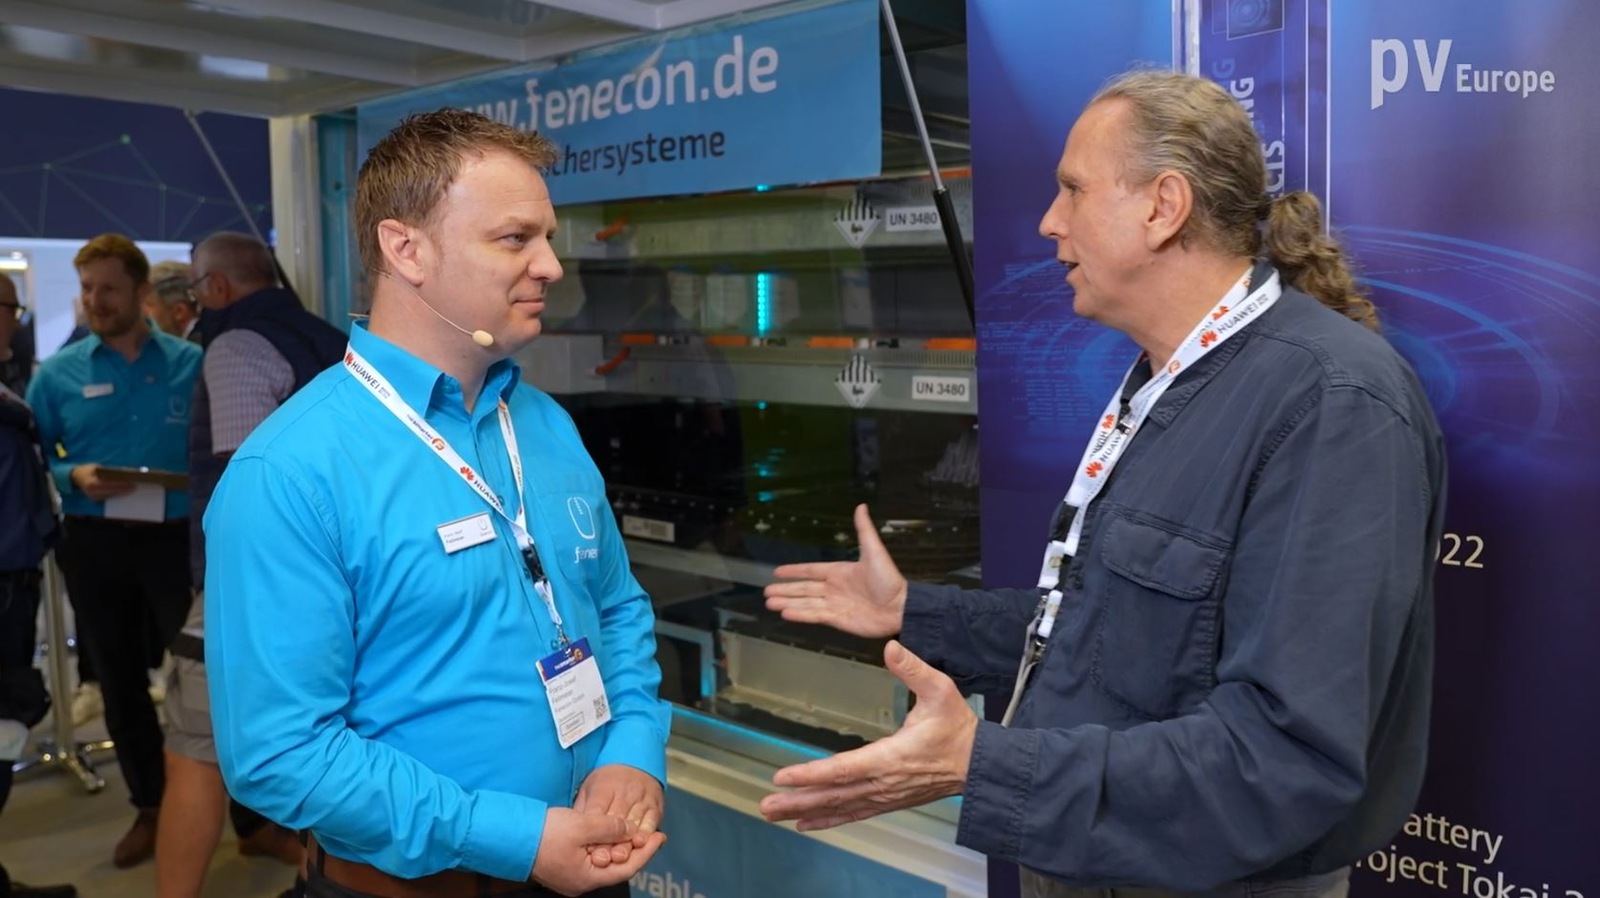 Franz-Josef Feilmeier of Fenecon: High-power storage systems for commercial users and the industry